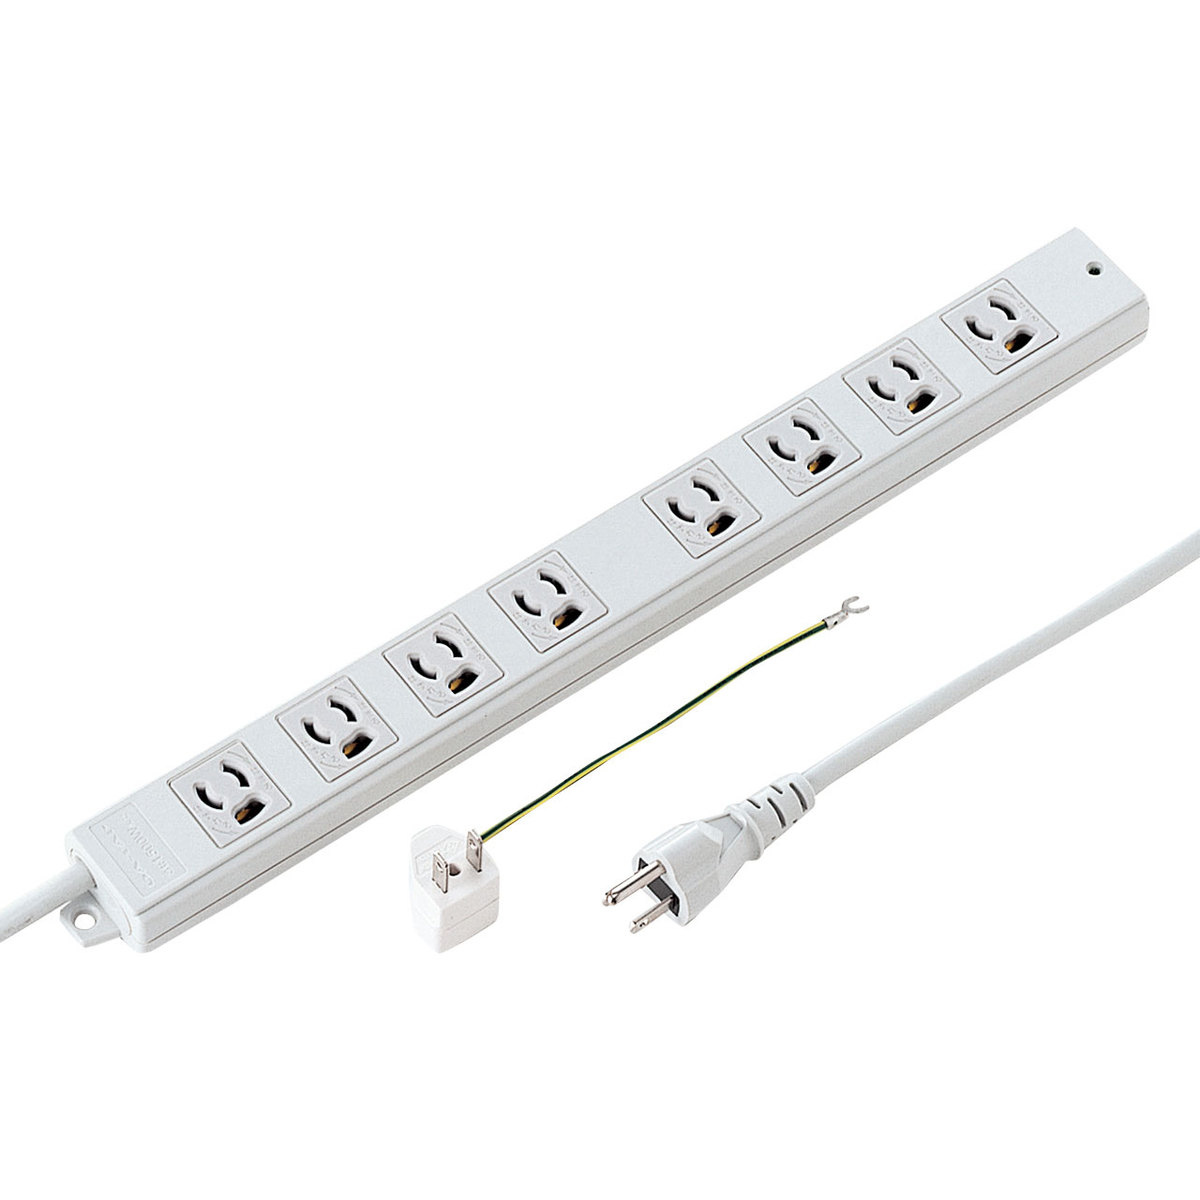 8-Outlet Removal Prevention Type Power Strip (Line Type Basic Model) TAP-MG3812N